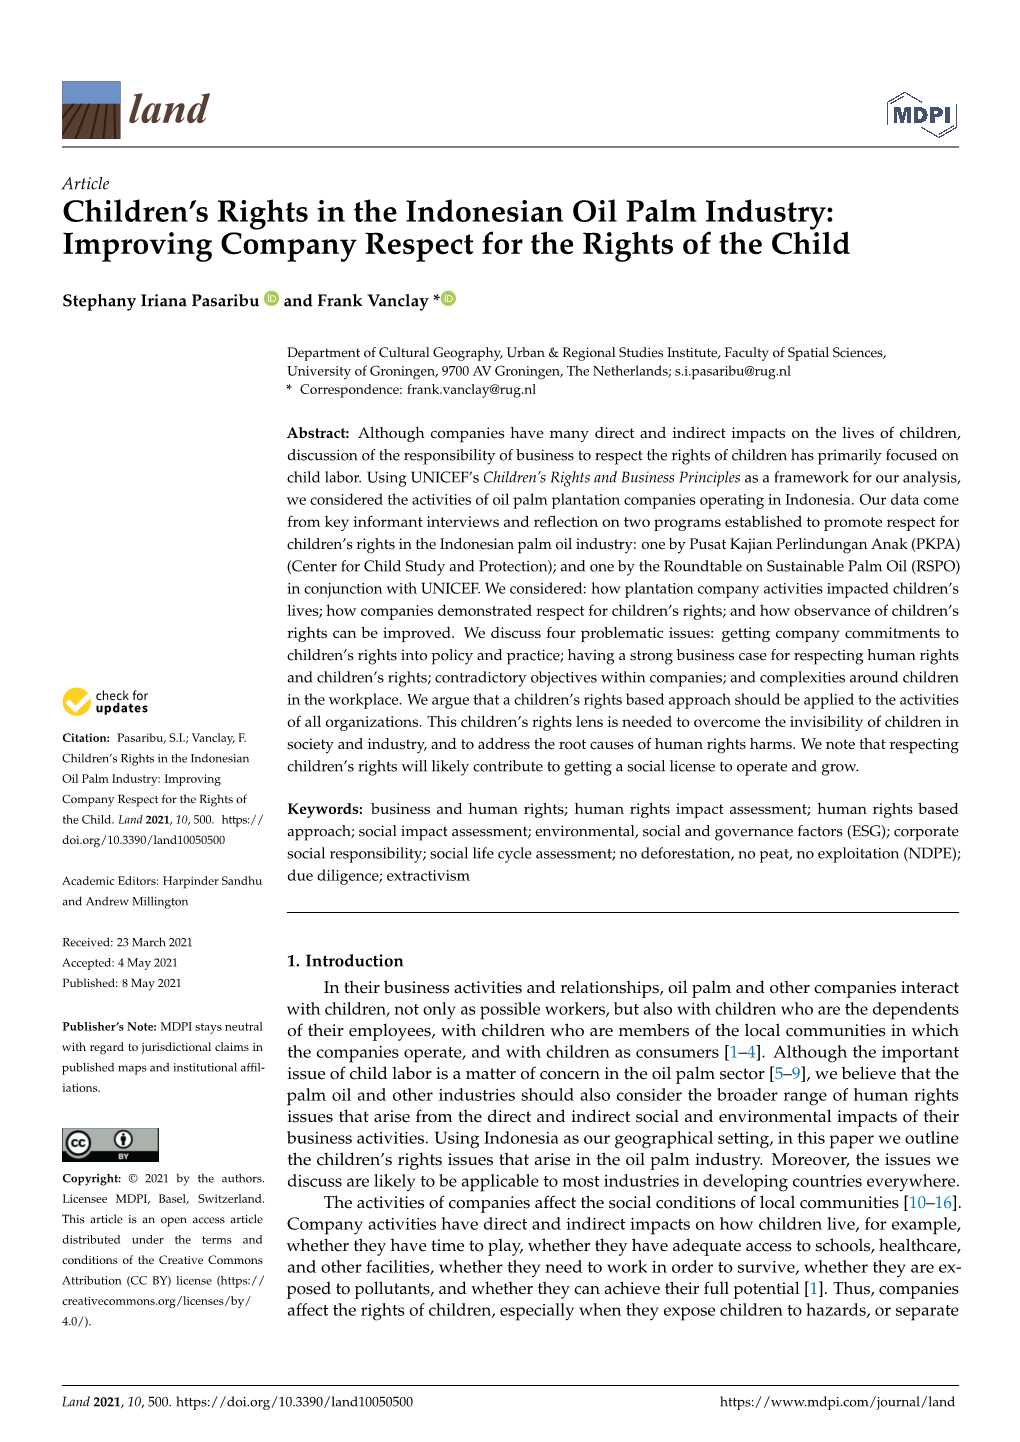 Children's Rights in the Indonesian Oil Palm Industry: Improving Company